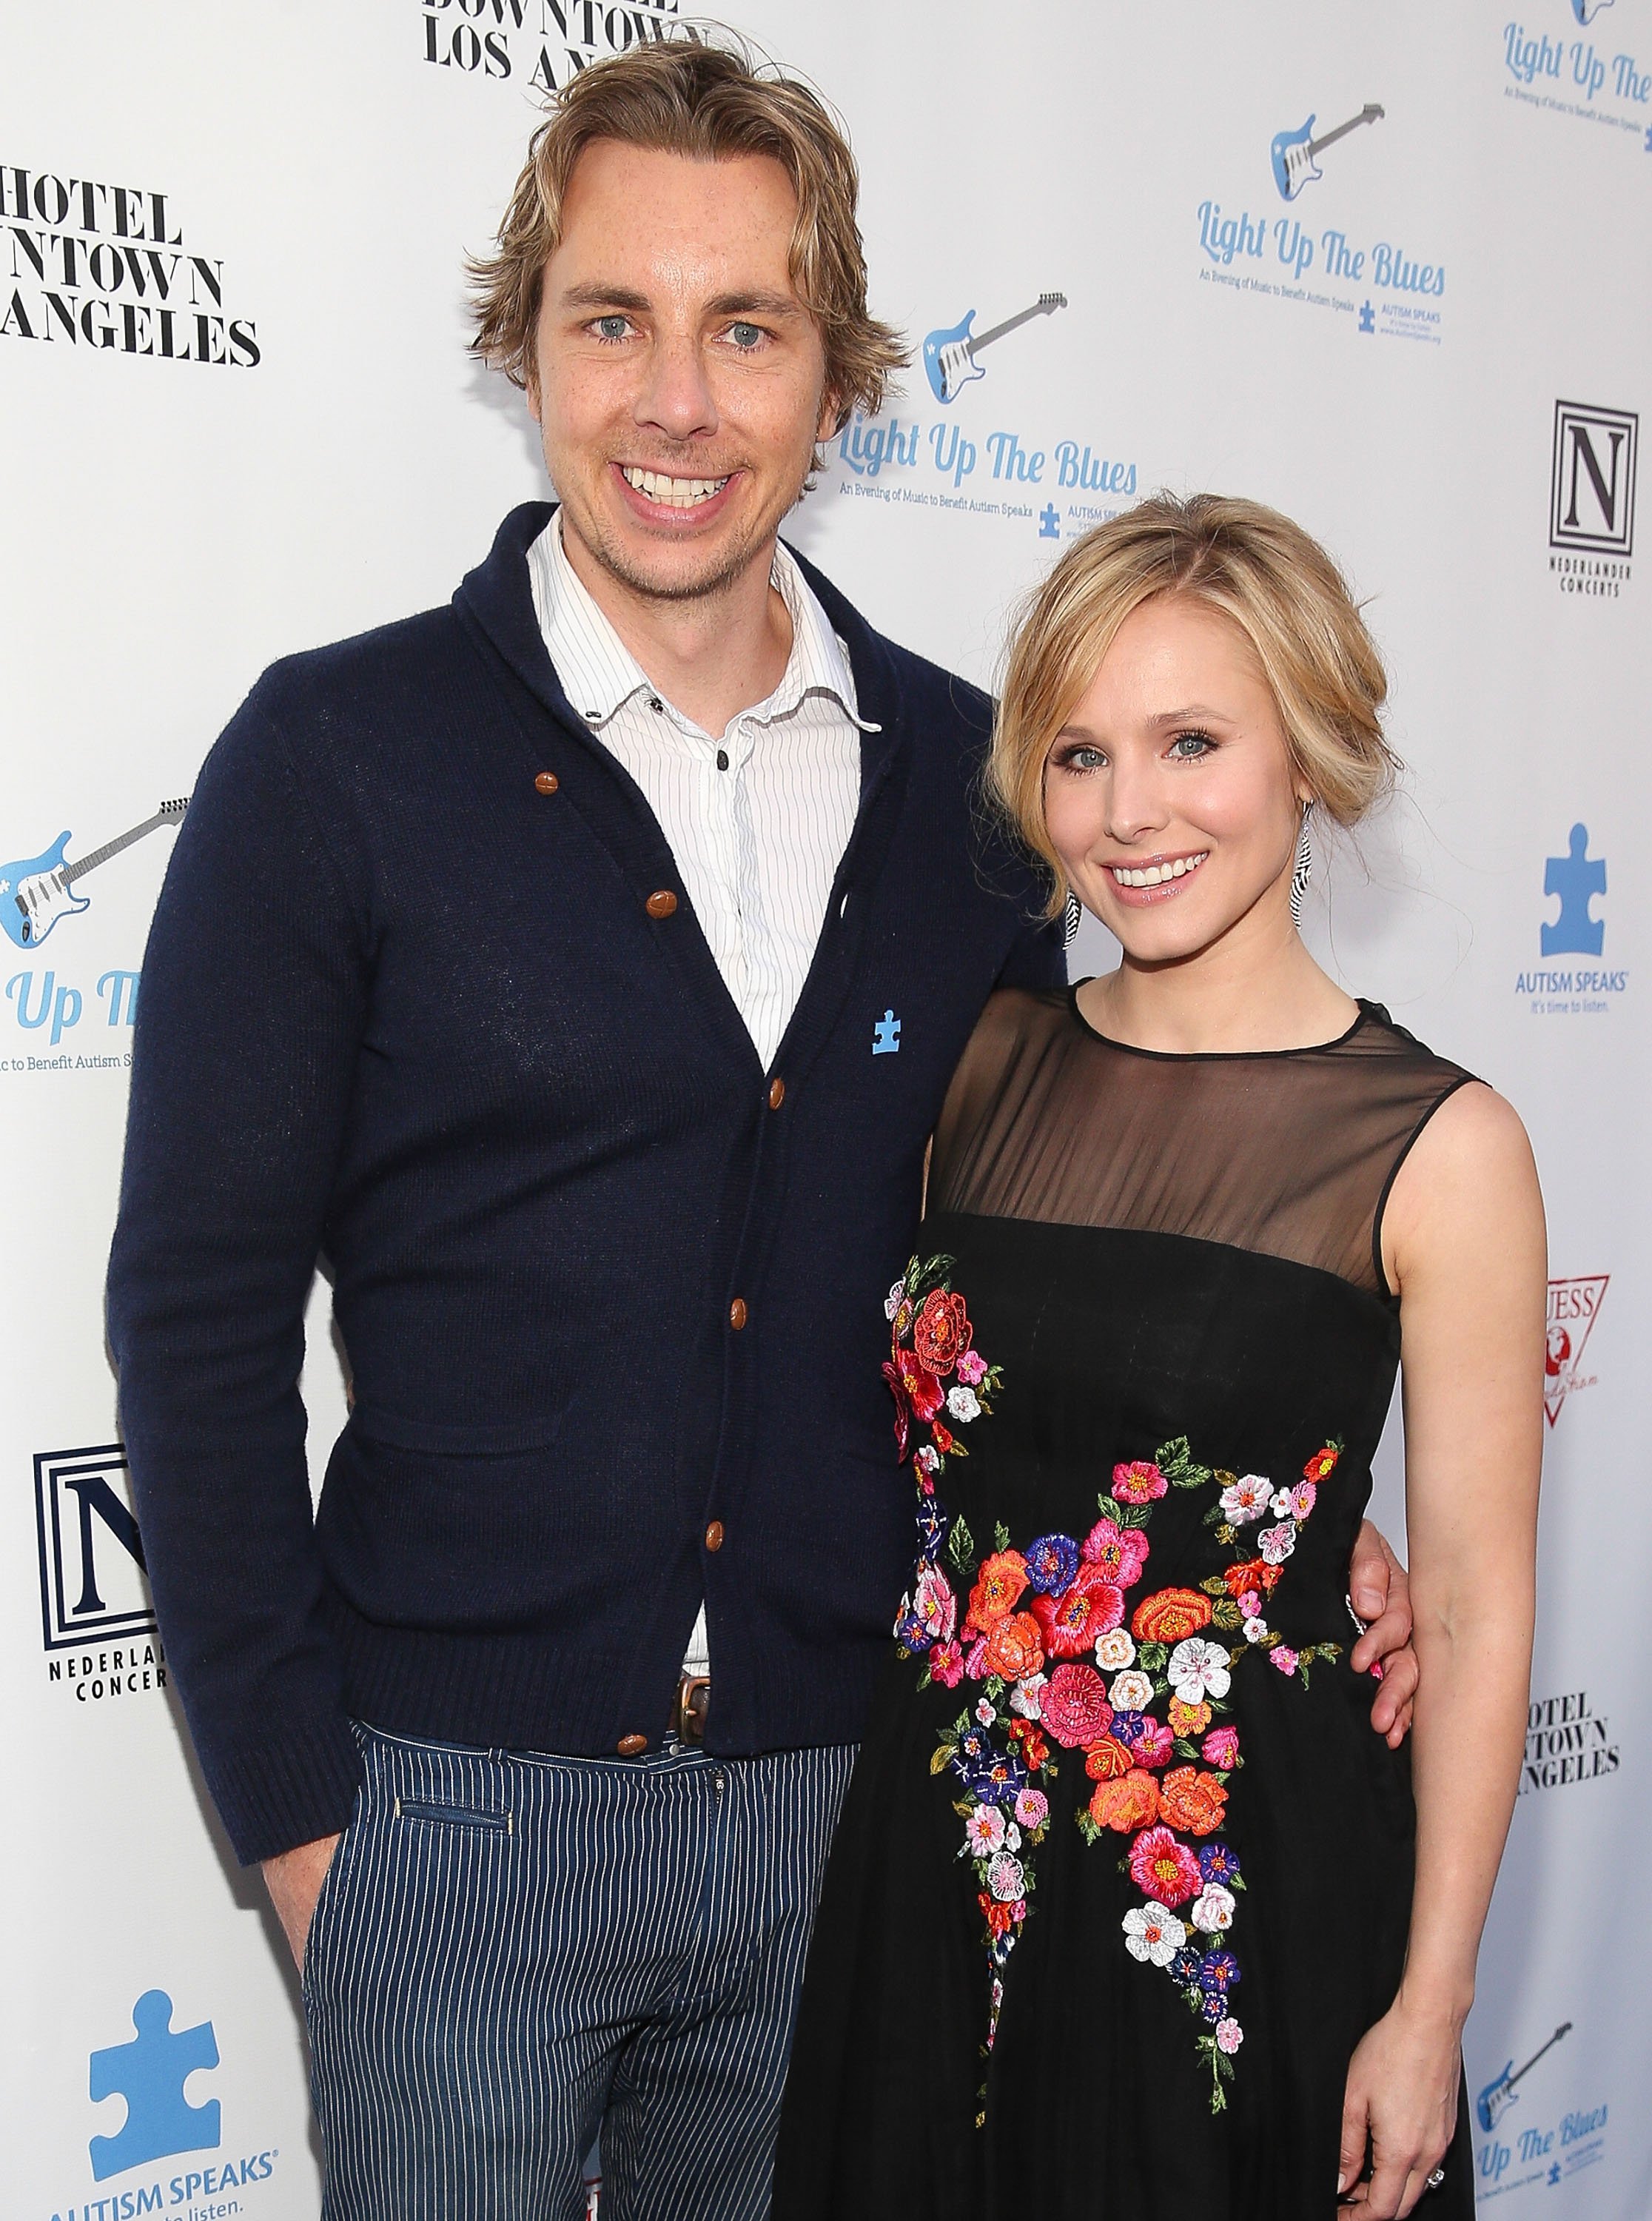 Dax Shepard (L) and actress Kristen Bell attend the 2nd Light Up The Blues Concert - An Evening Of Music To Benefit Autism Speaks at The Theatre At Ace Hotel on April 5, 2014, in Los Angeles, California. | Source: Getty Images.